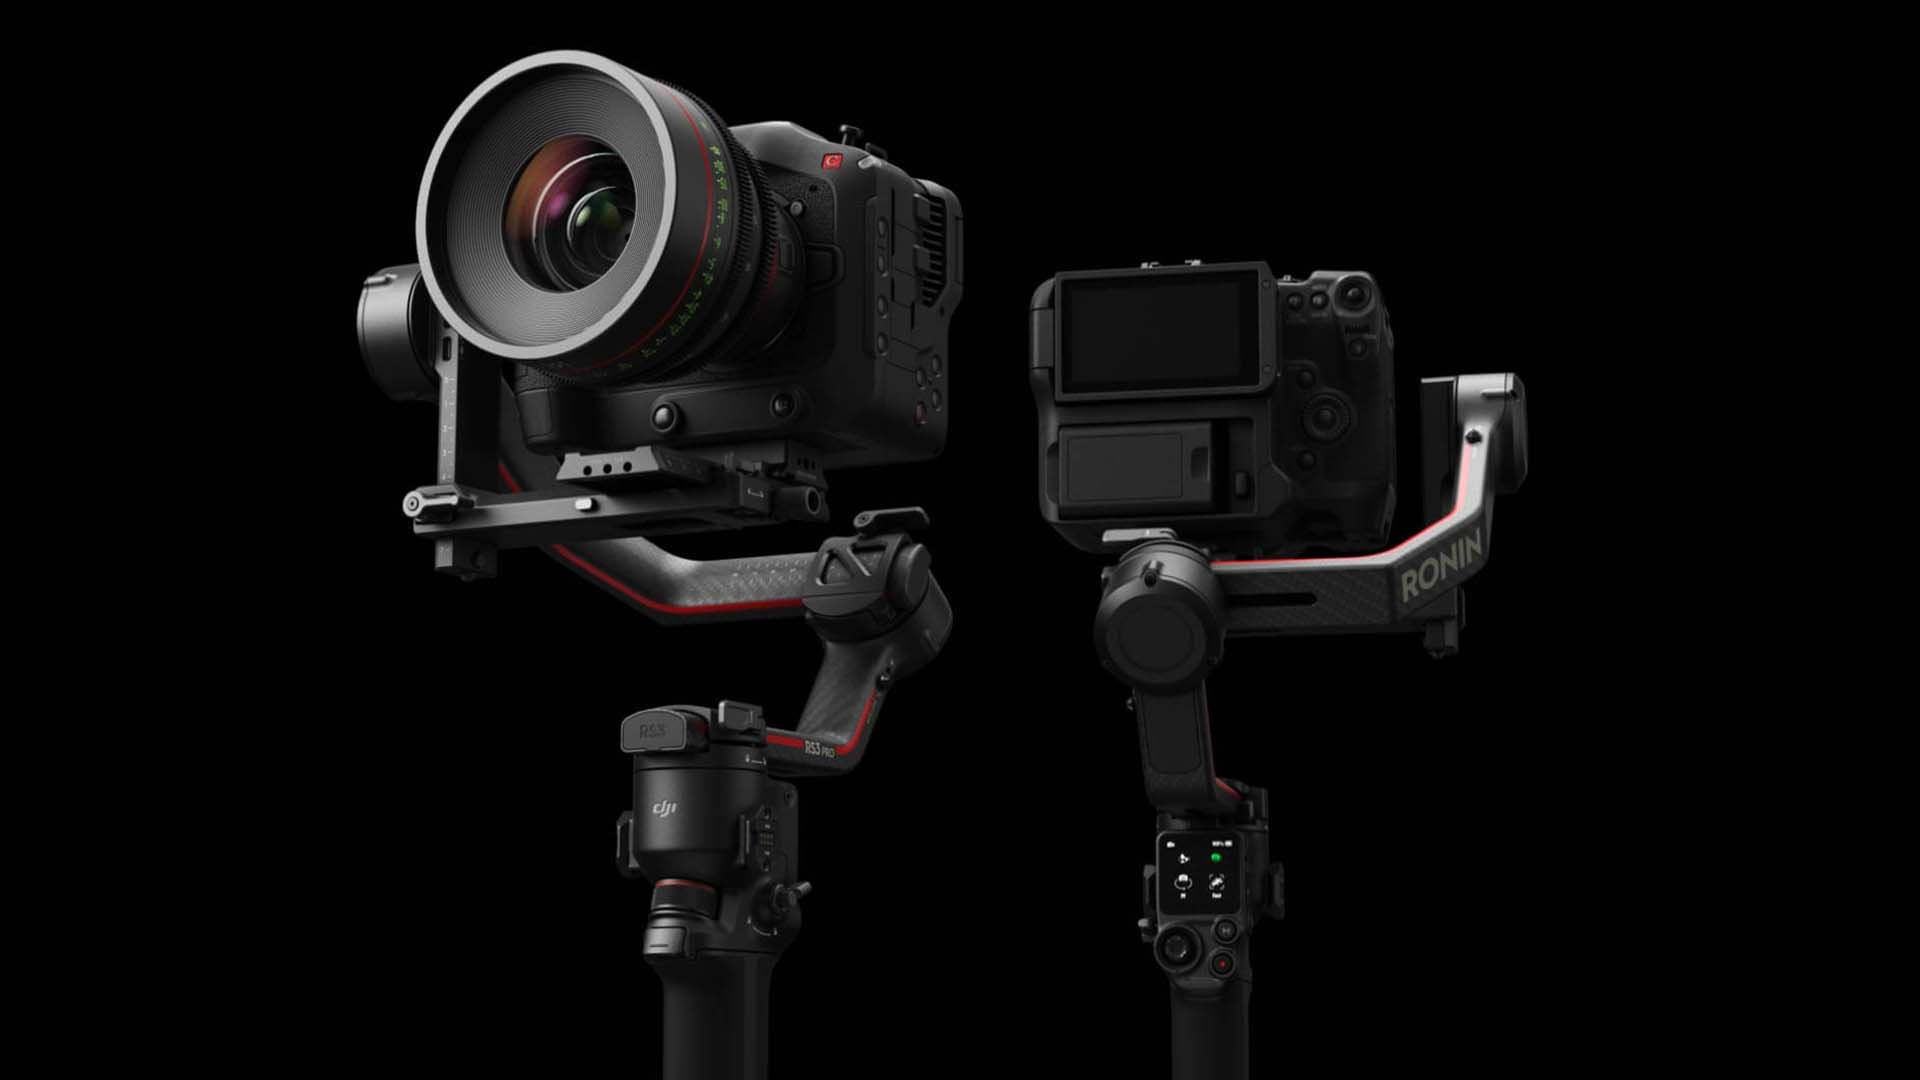 DJI RS 3 Pro gimbal review: With great power comes great responsibility